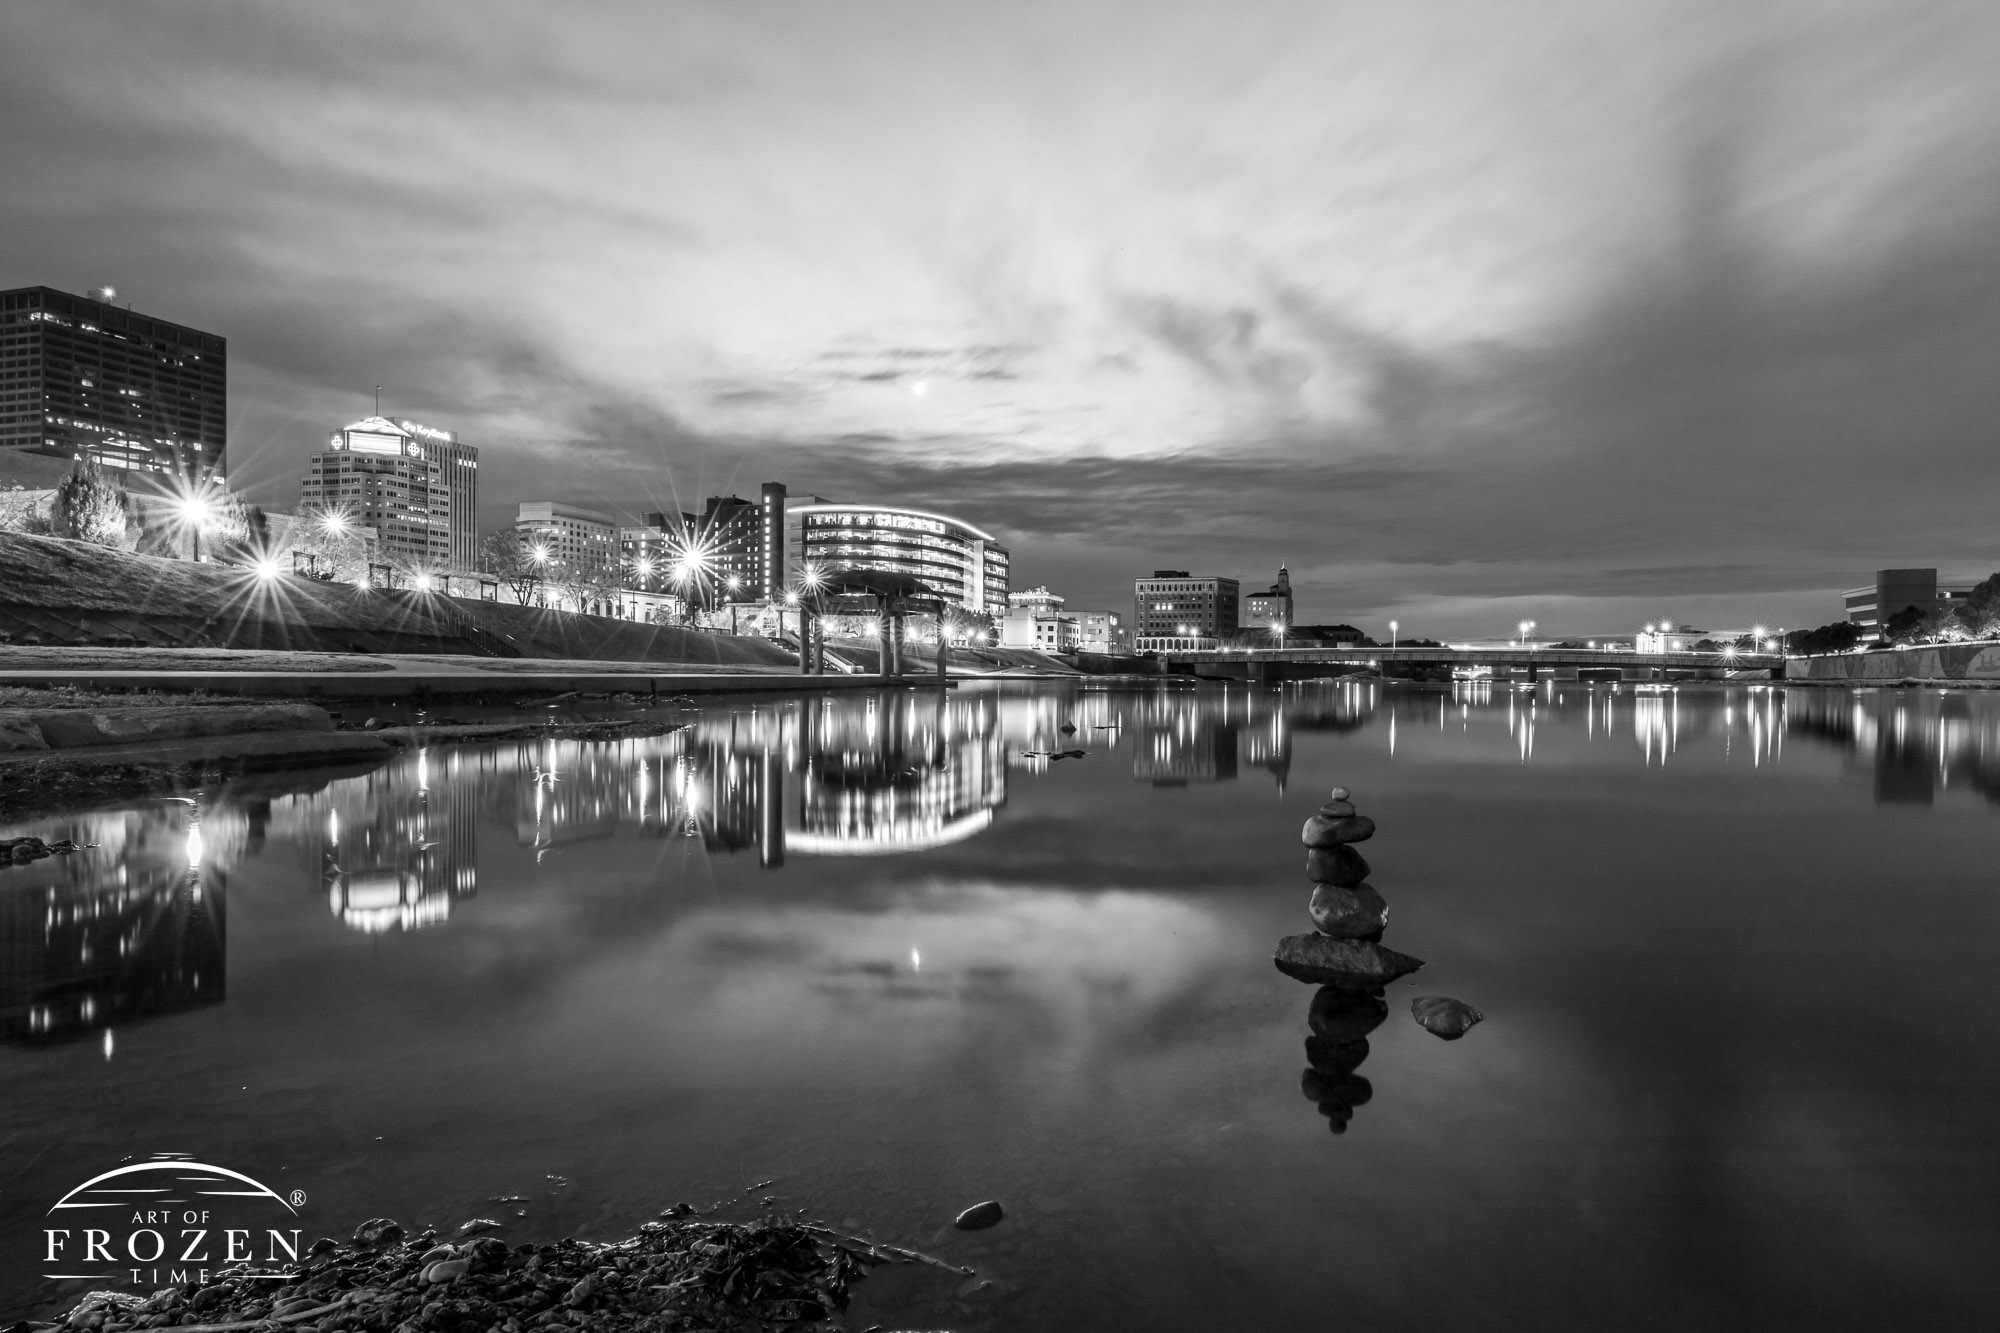 An evening scene of the Dayton Skyline rendered in black and white where the smooth Miami River surface reflects the RiverScape MetroPark lights.